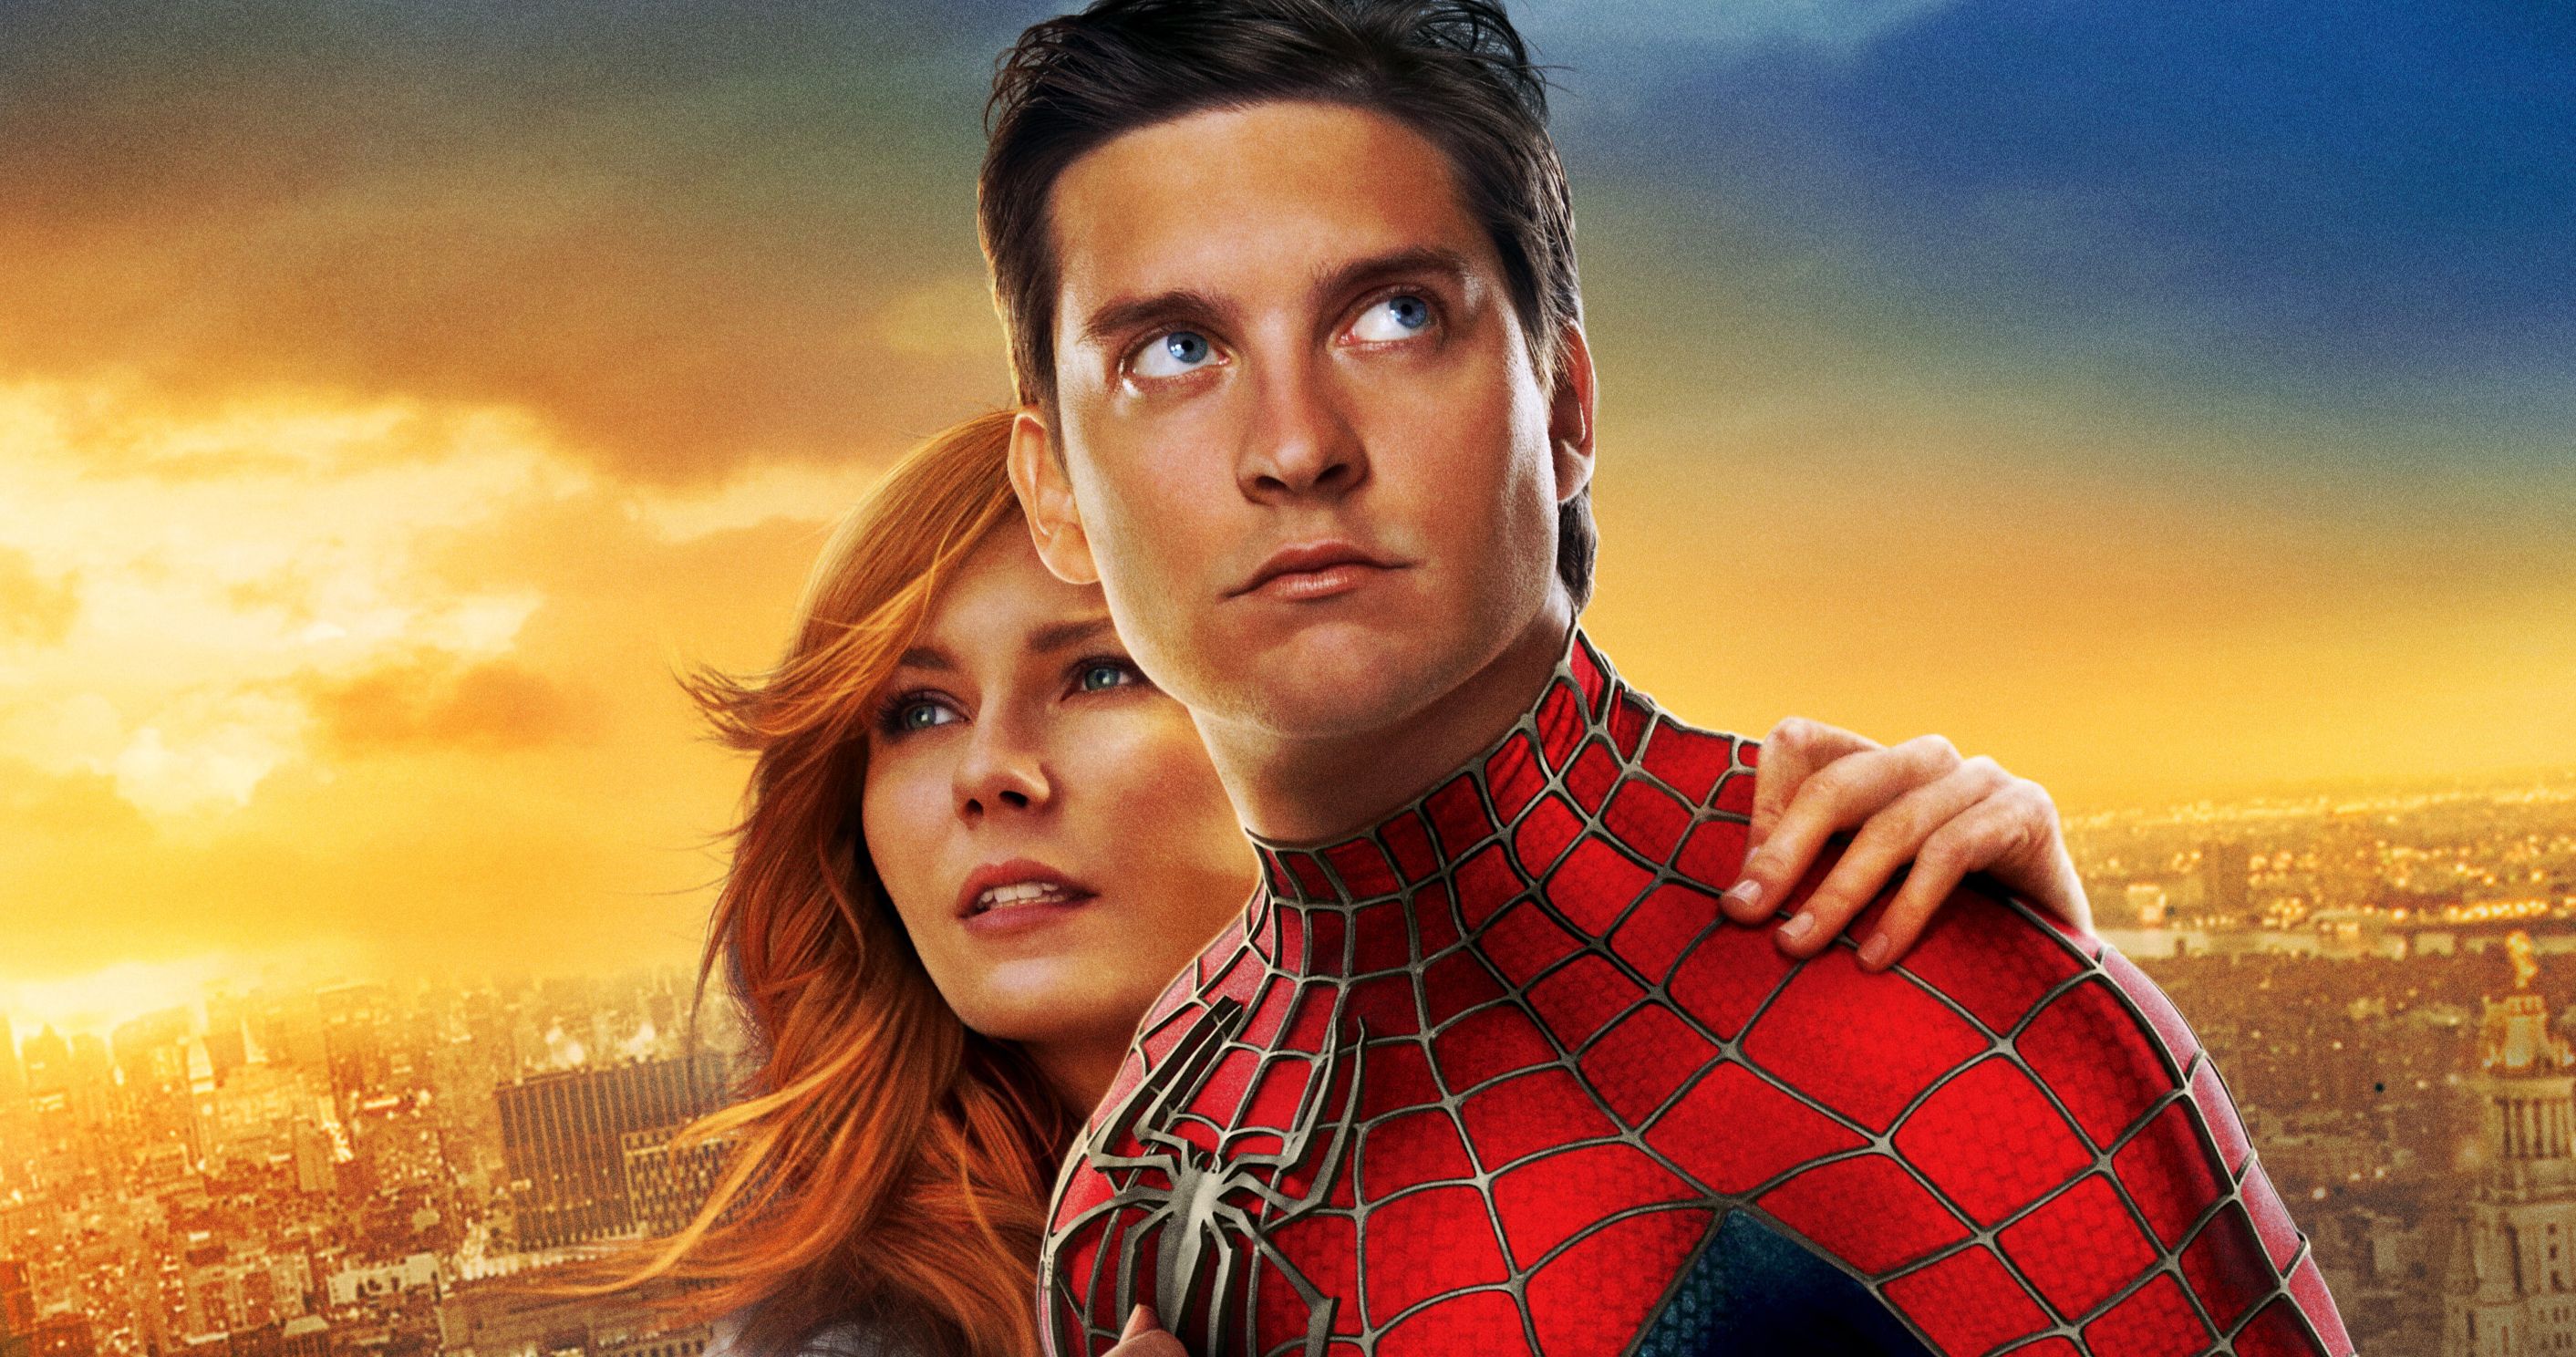 Spider-Man 4 Rumored to Reunite Sam Raimi & Tobey Maguire at Sony